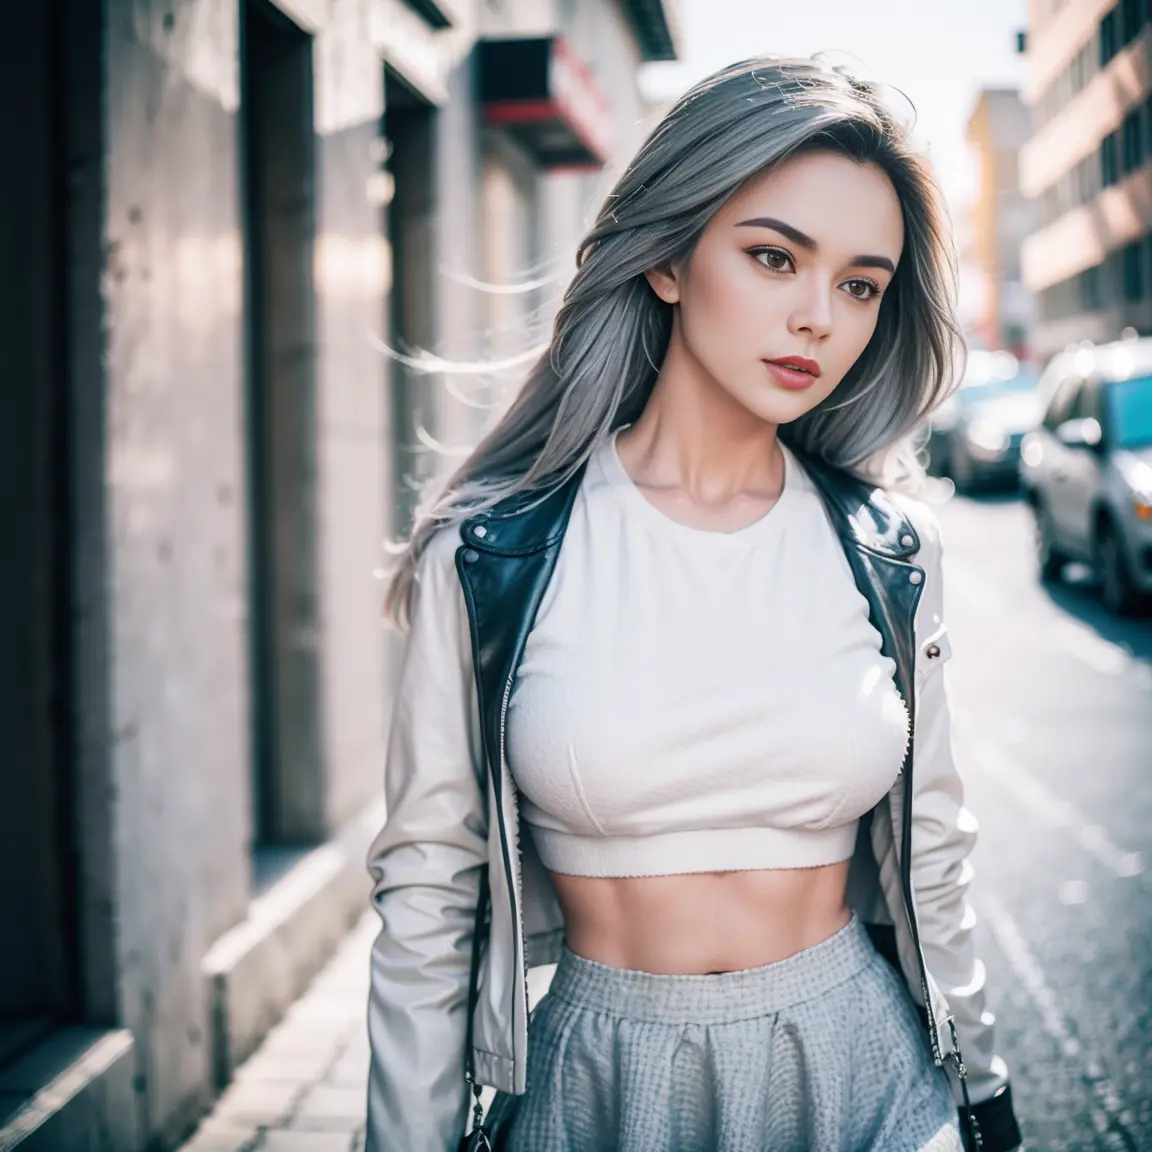 gorgeous cute Austrian girl, (crop  top), Steel gray hair loose  hair, wears a white top ,black boots, standing on the street, w...